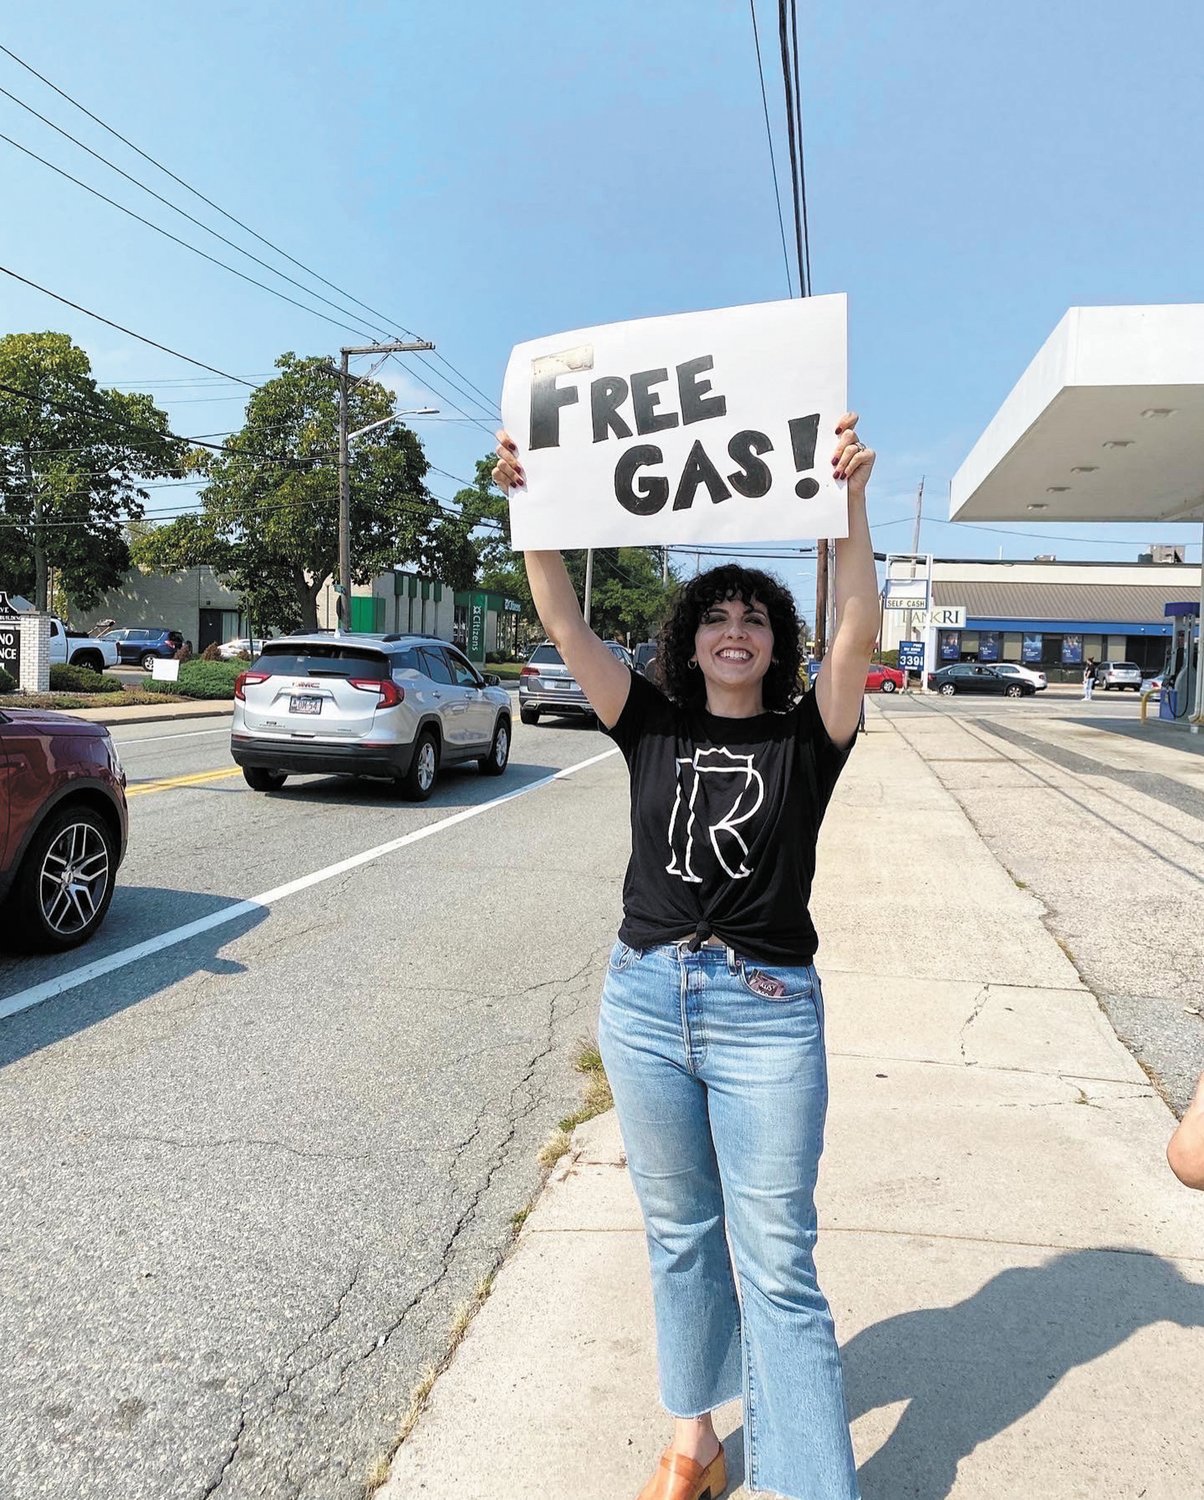 FREE GAS! STOP BY: Hannah McMillan held a sign outside Savers Mart on Park Avenue to let individuals know that Region Church was providing $20 worth of free gas for drivers.